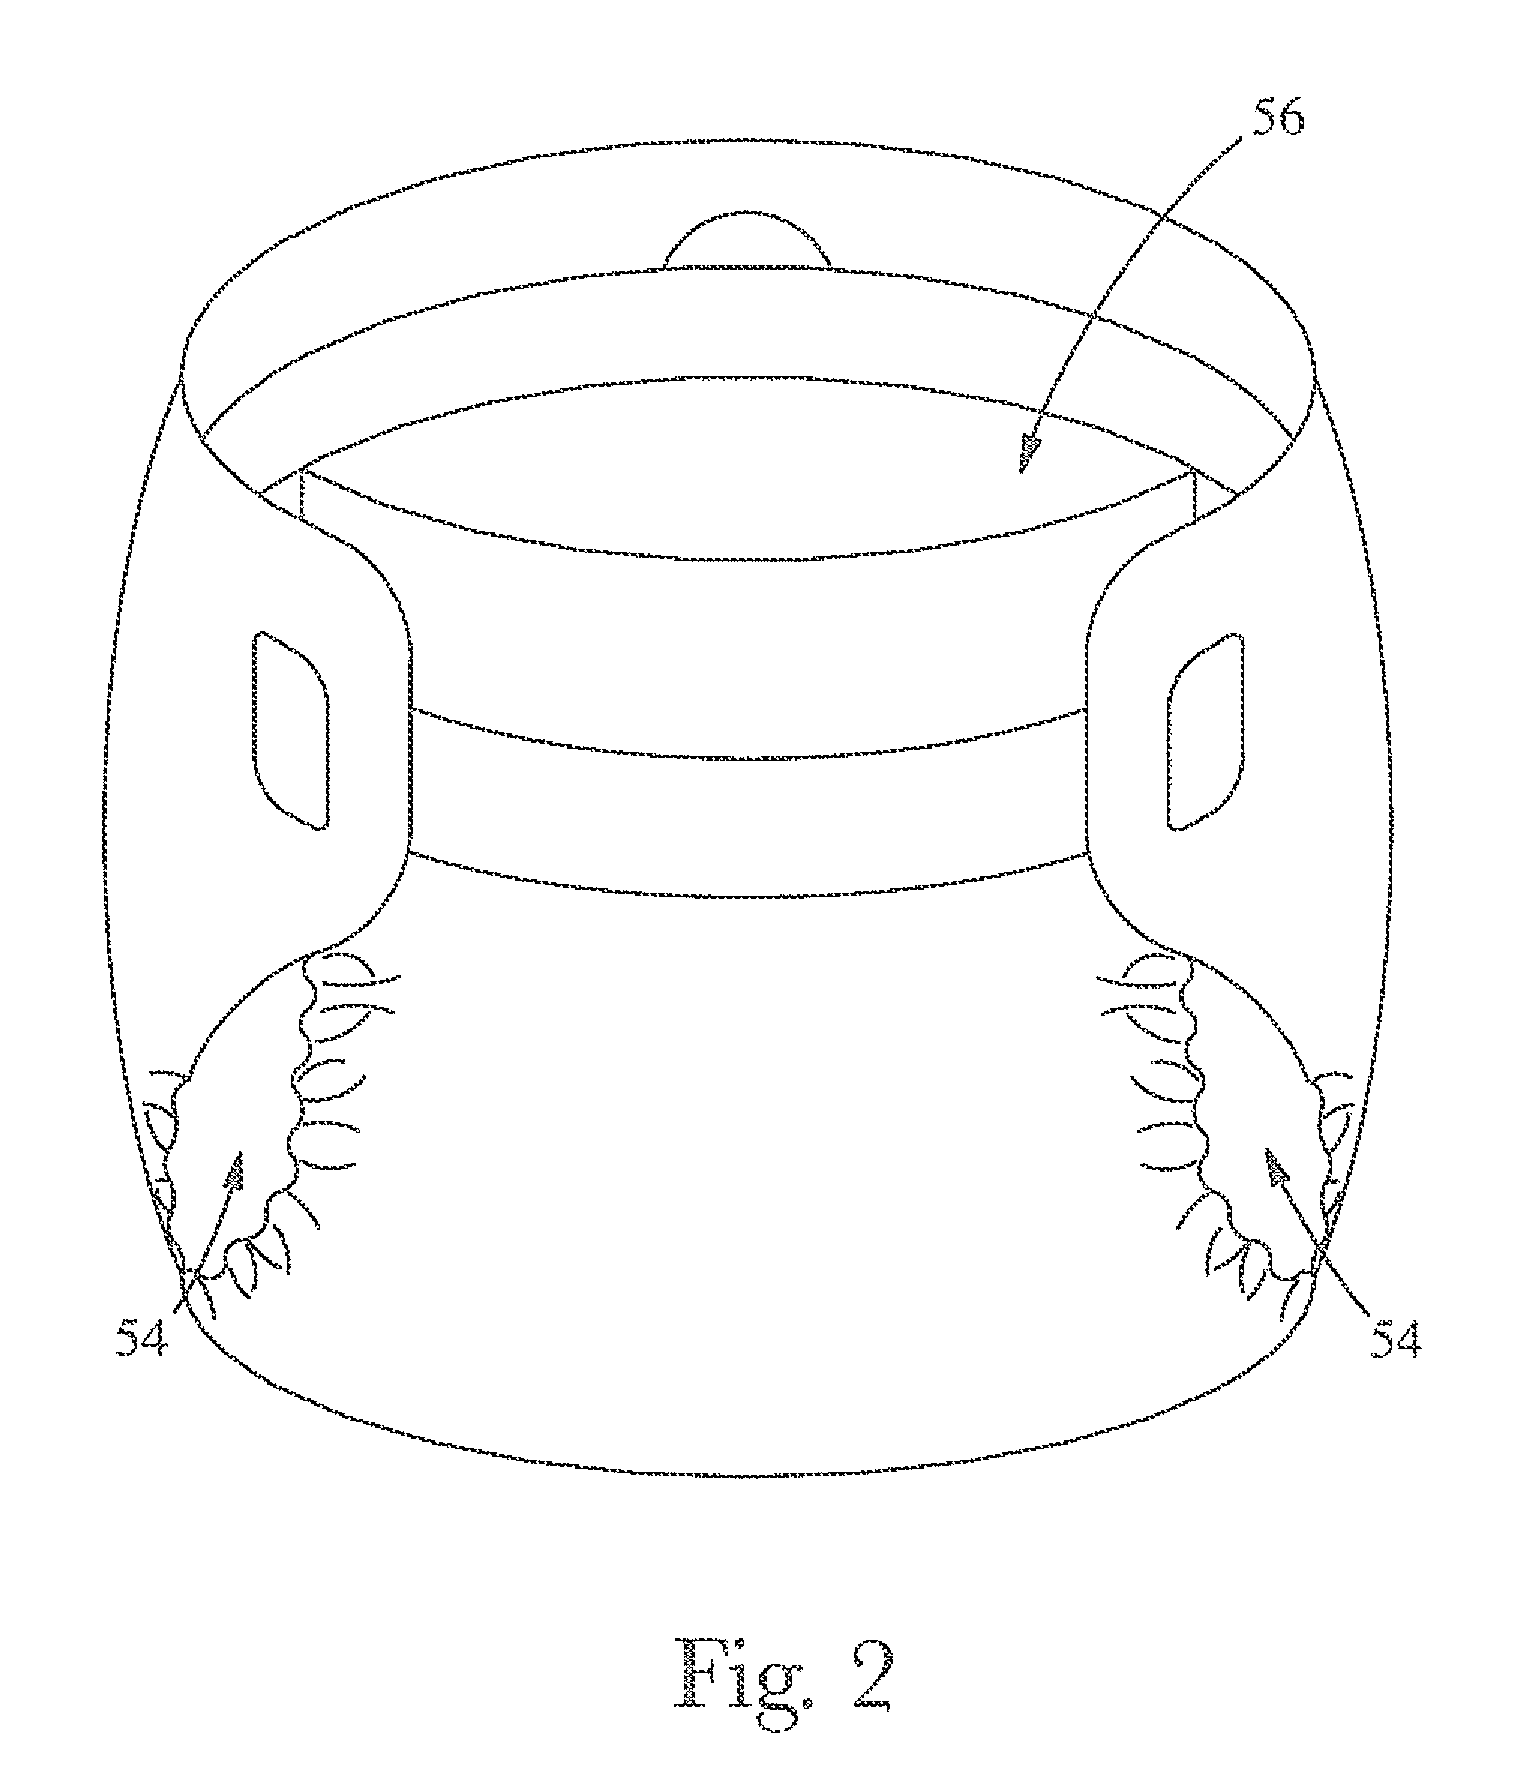 Reusable outer cover for an absorbent article having zones of varying properties